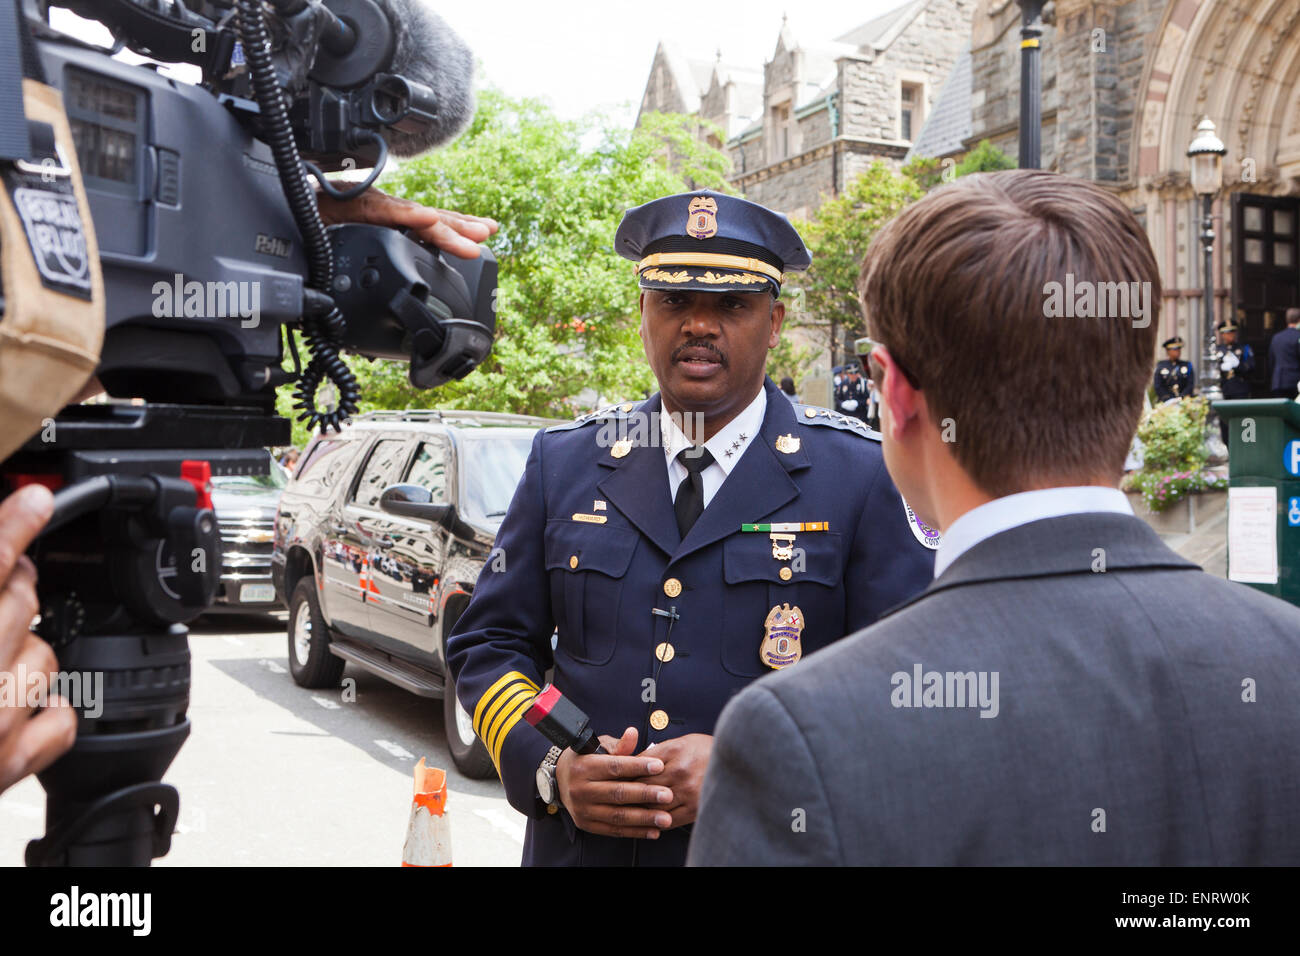 Craig Howard, Assistant Chief of Police, Prince George County, Maryland, speaks with press at 2015 National Police Week - Washington, DC Stock Photo